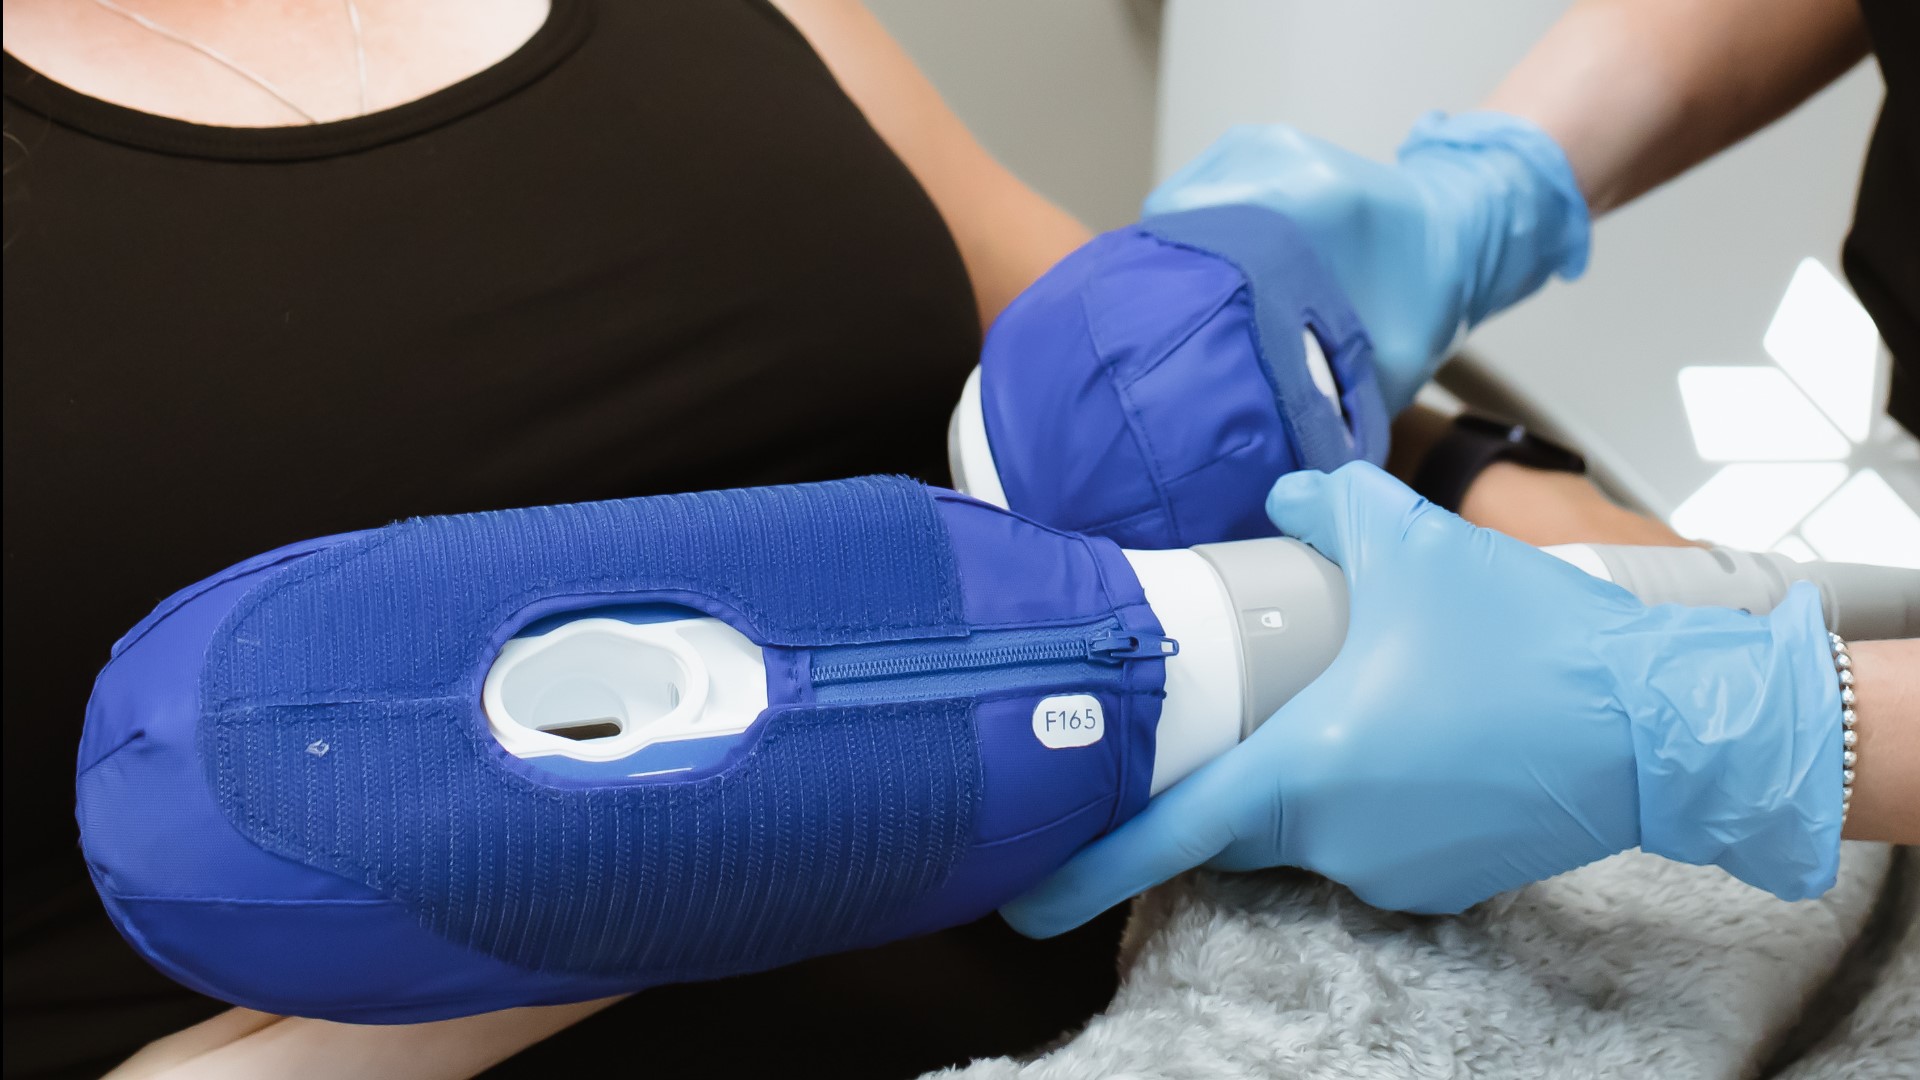 RejuvenationMD is the first medical aesthetic office to bring North Sound patients the most advanced CoolSculpting yet. Sponsored by Rejuvenation MD.